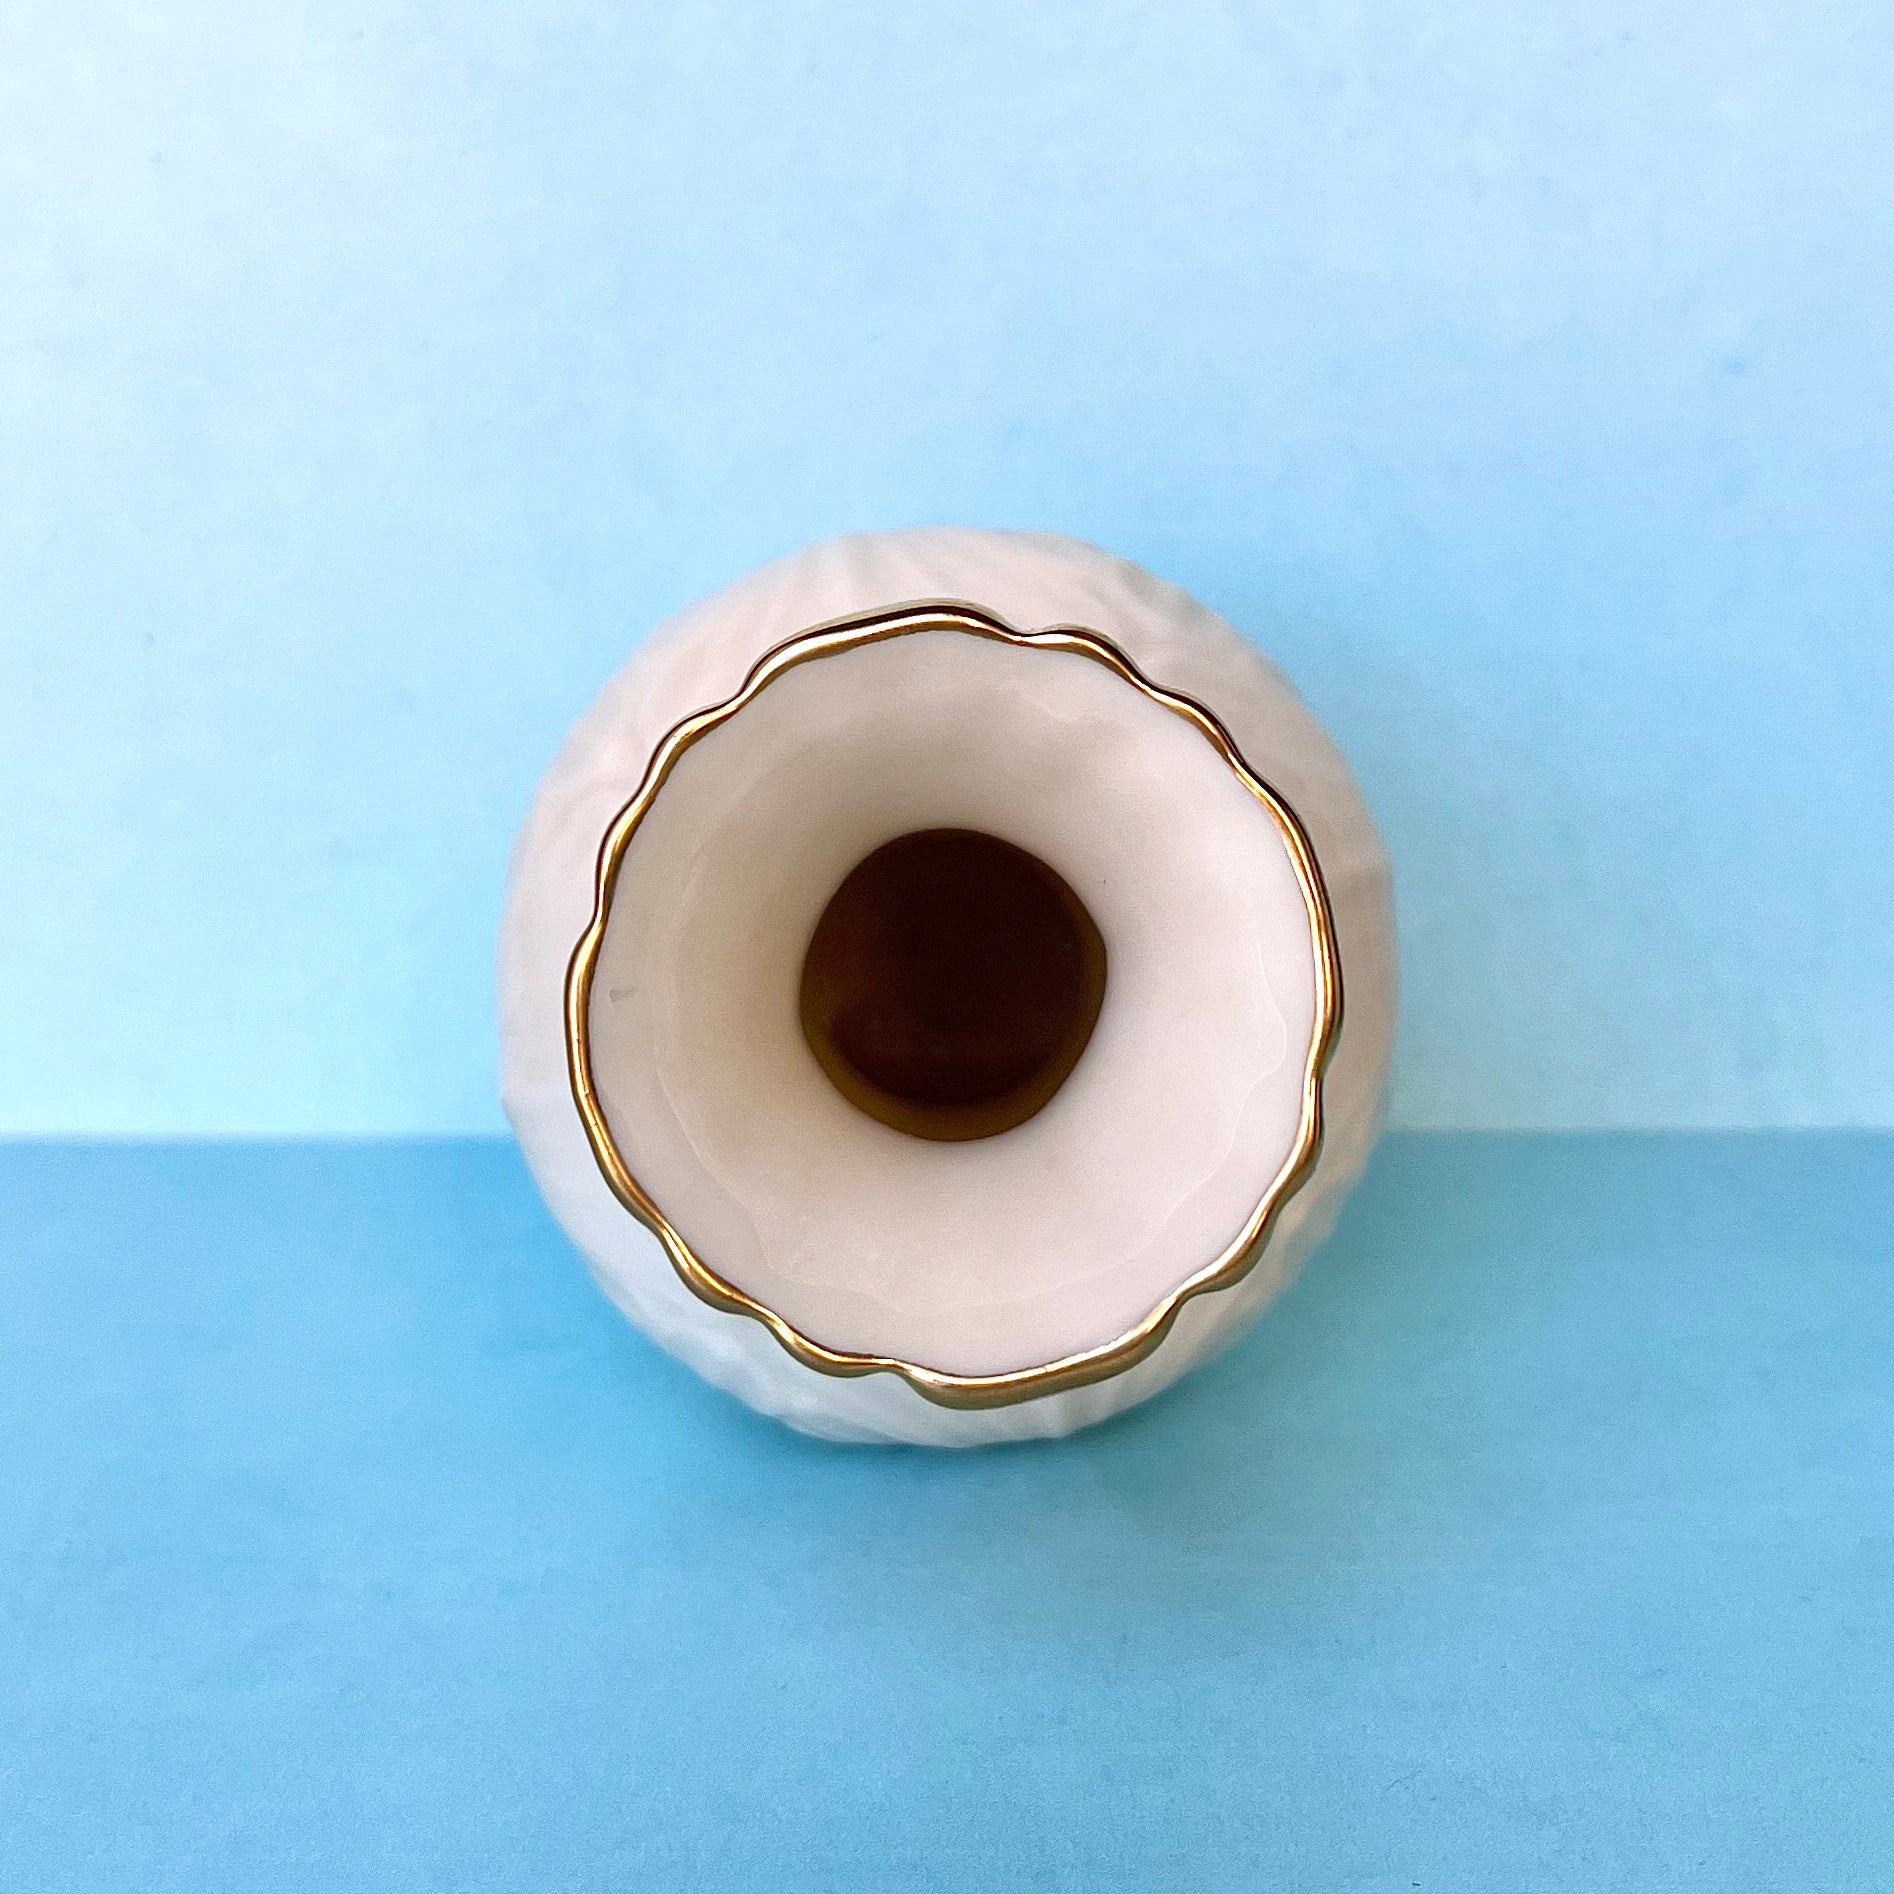 The top opening of a small white bud vase with gold trim